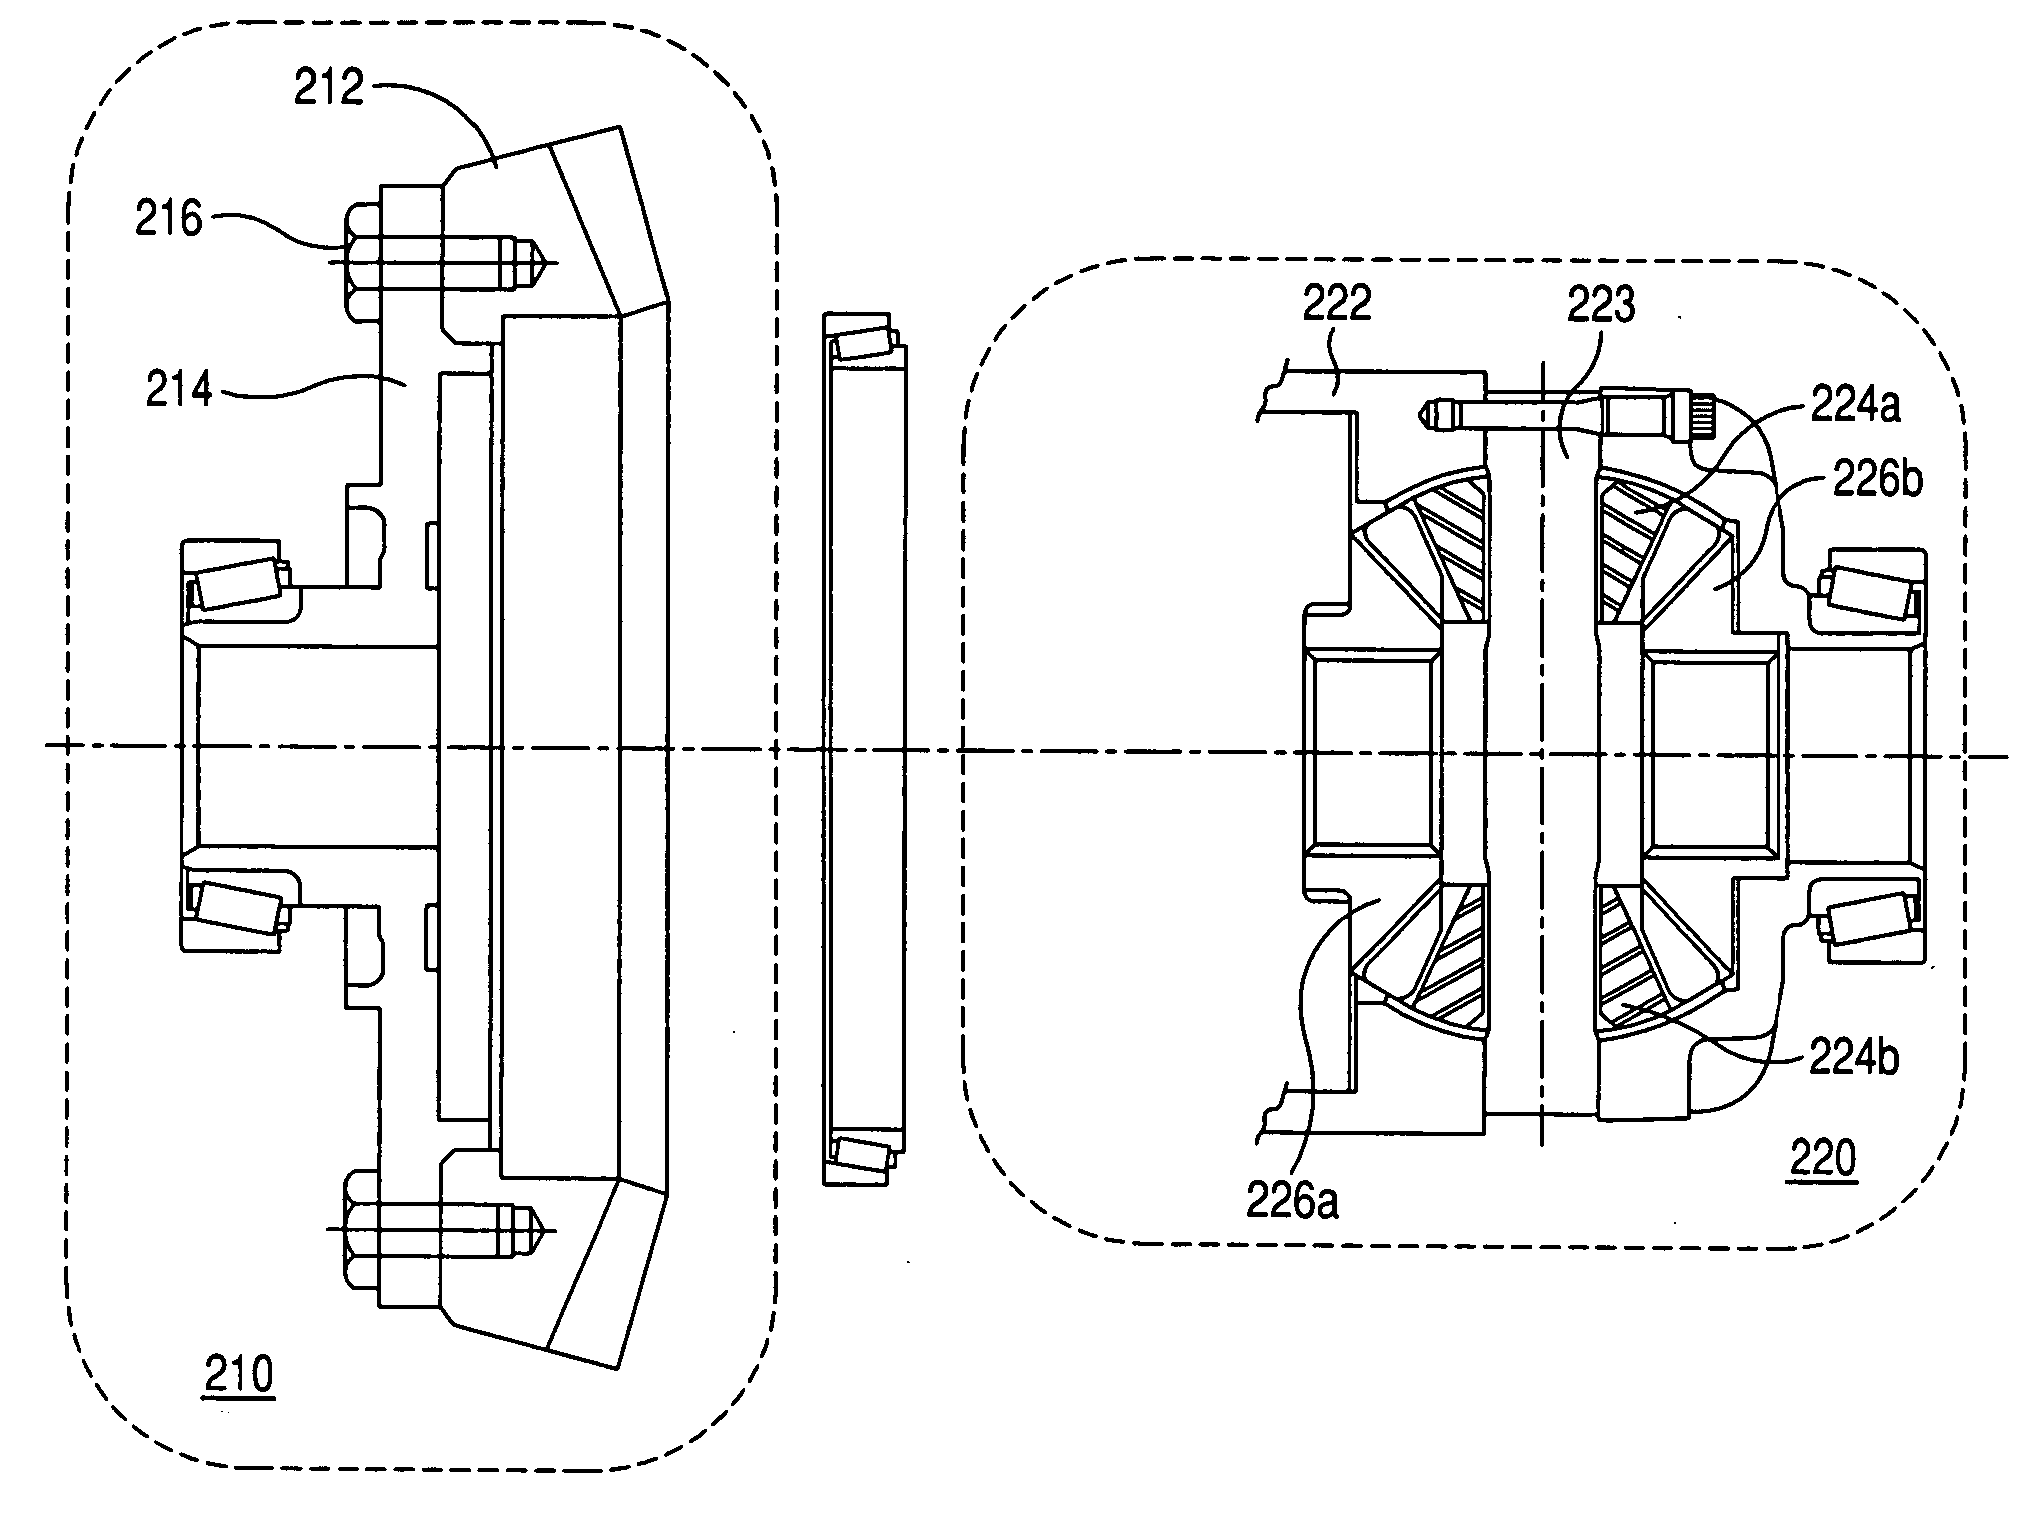 Solenoid actuated variable pressure relief valve assembly for torque transfer assembly